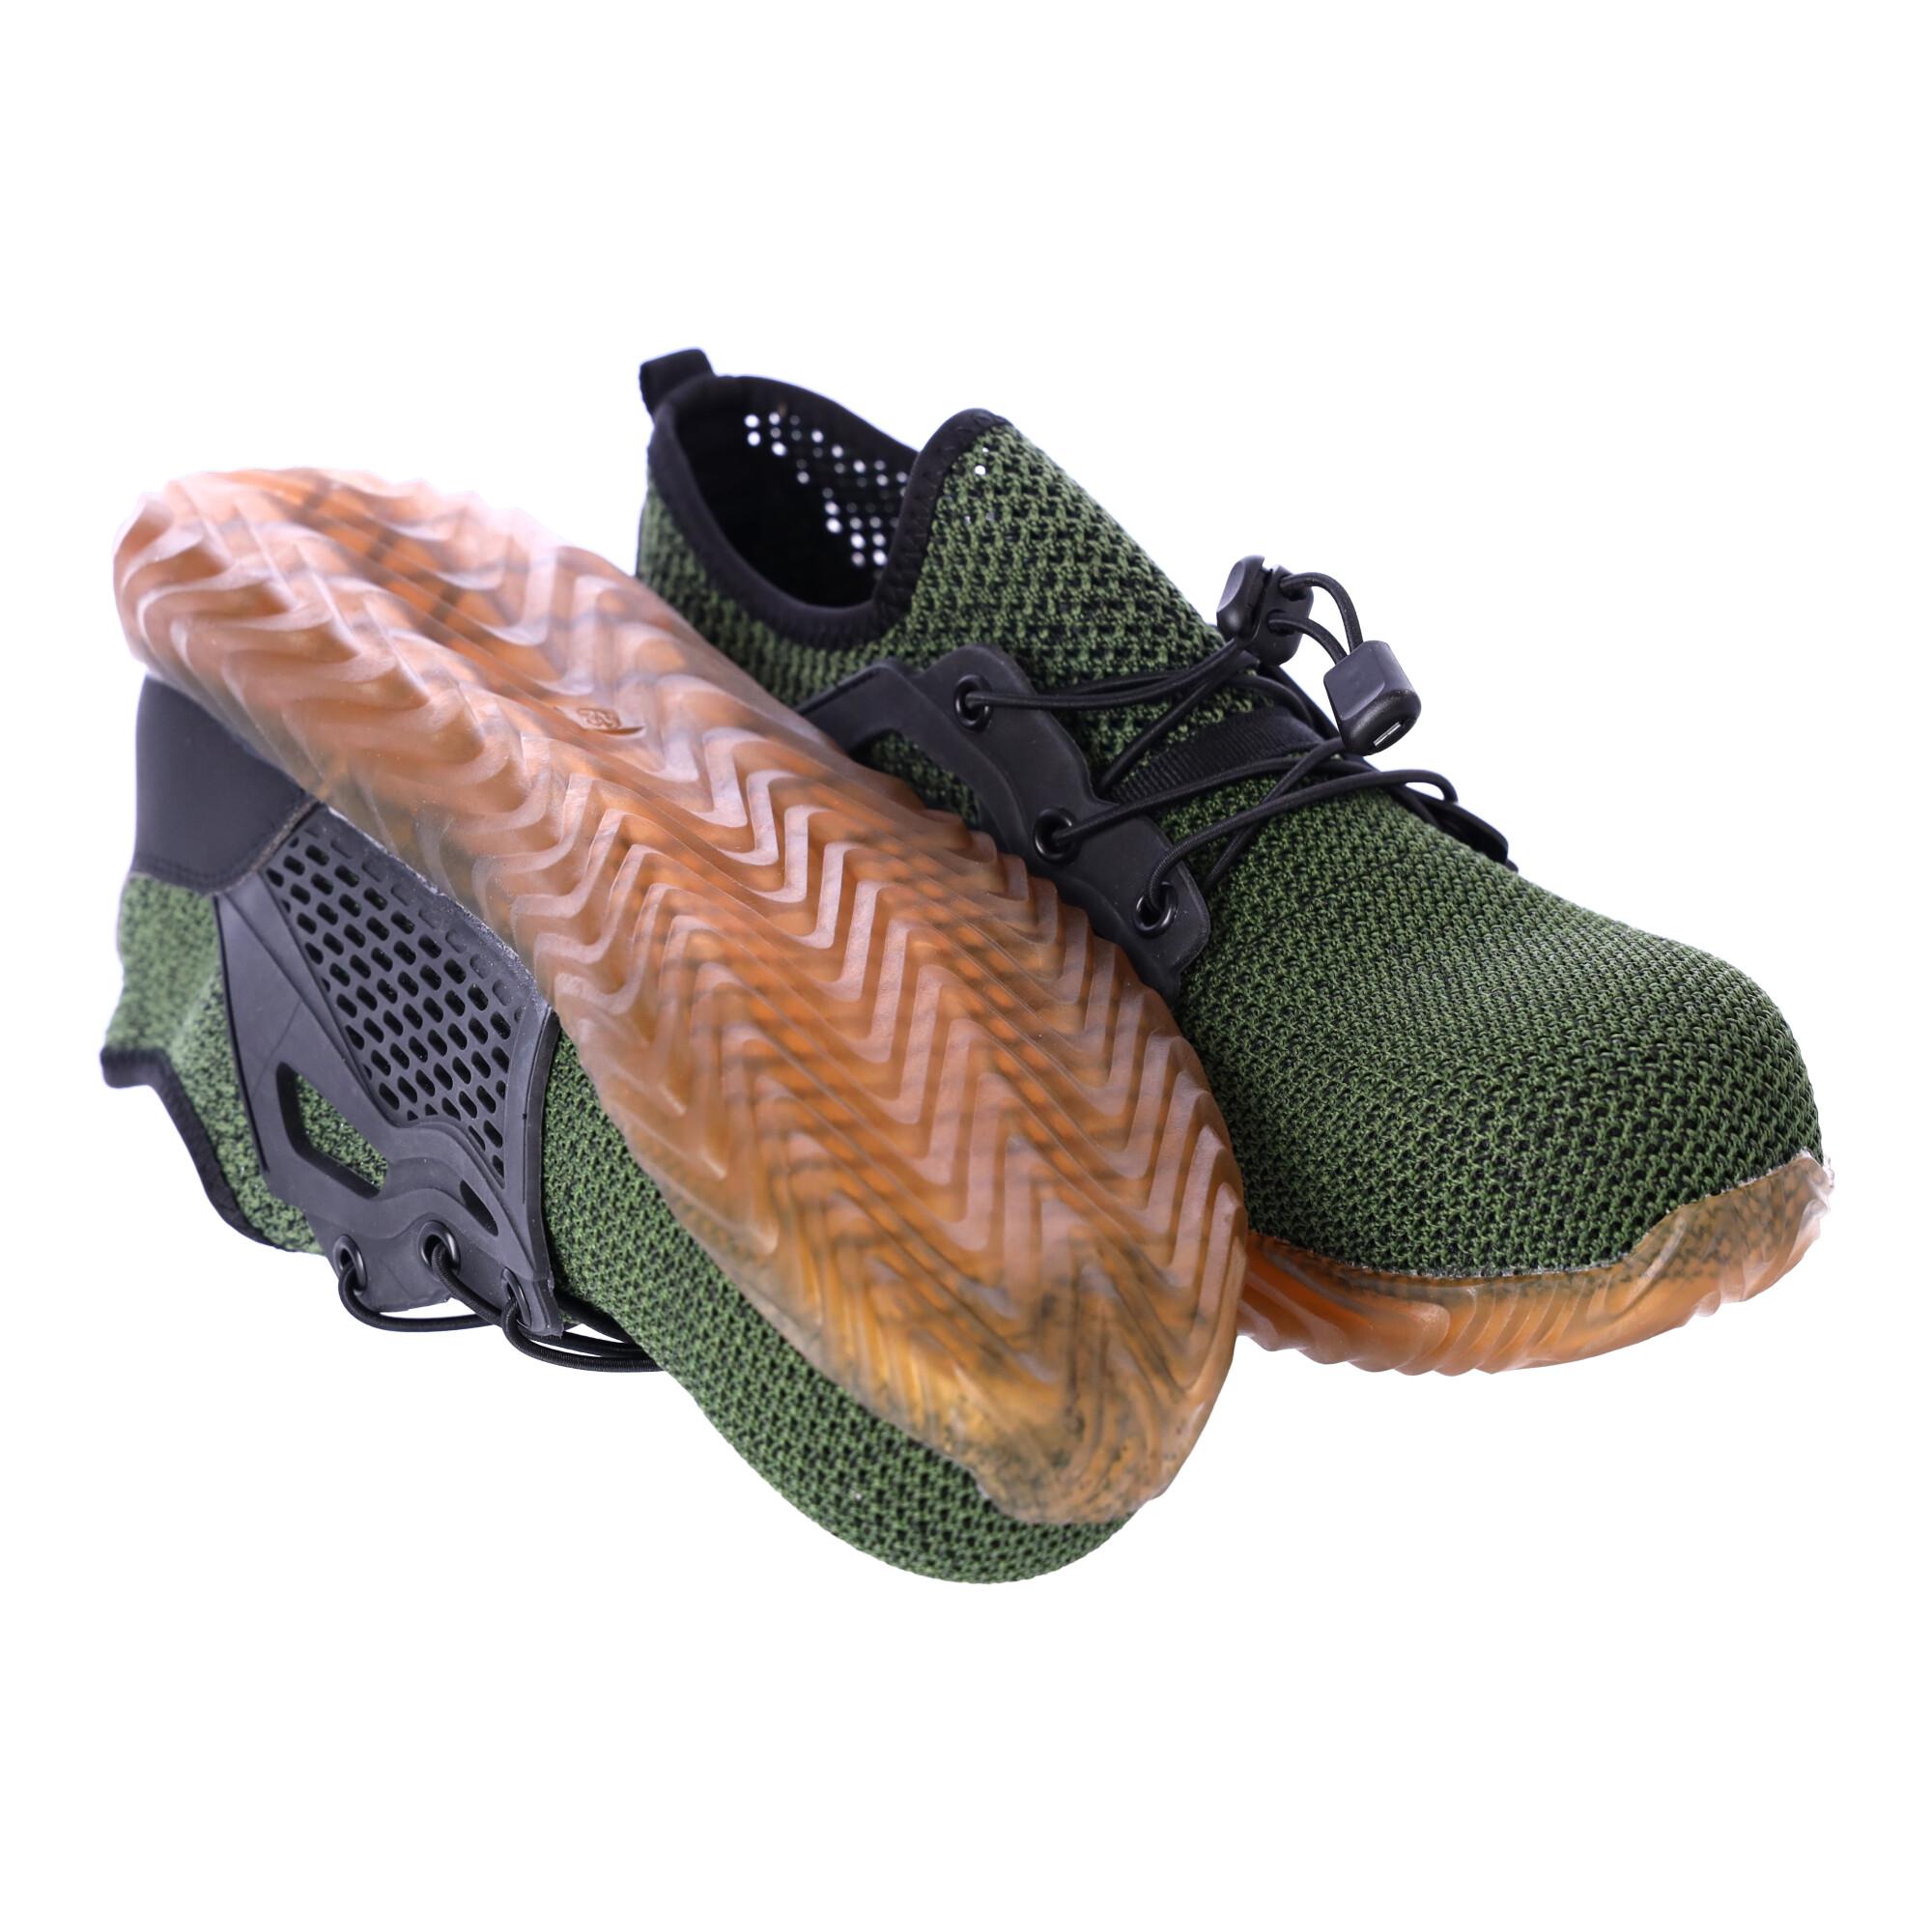 Work safety shoes Soft "42" - green